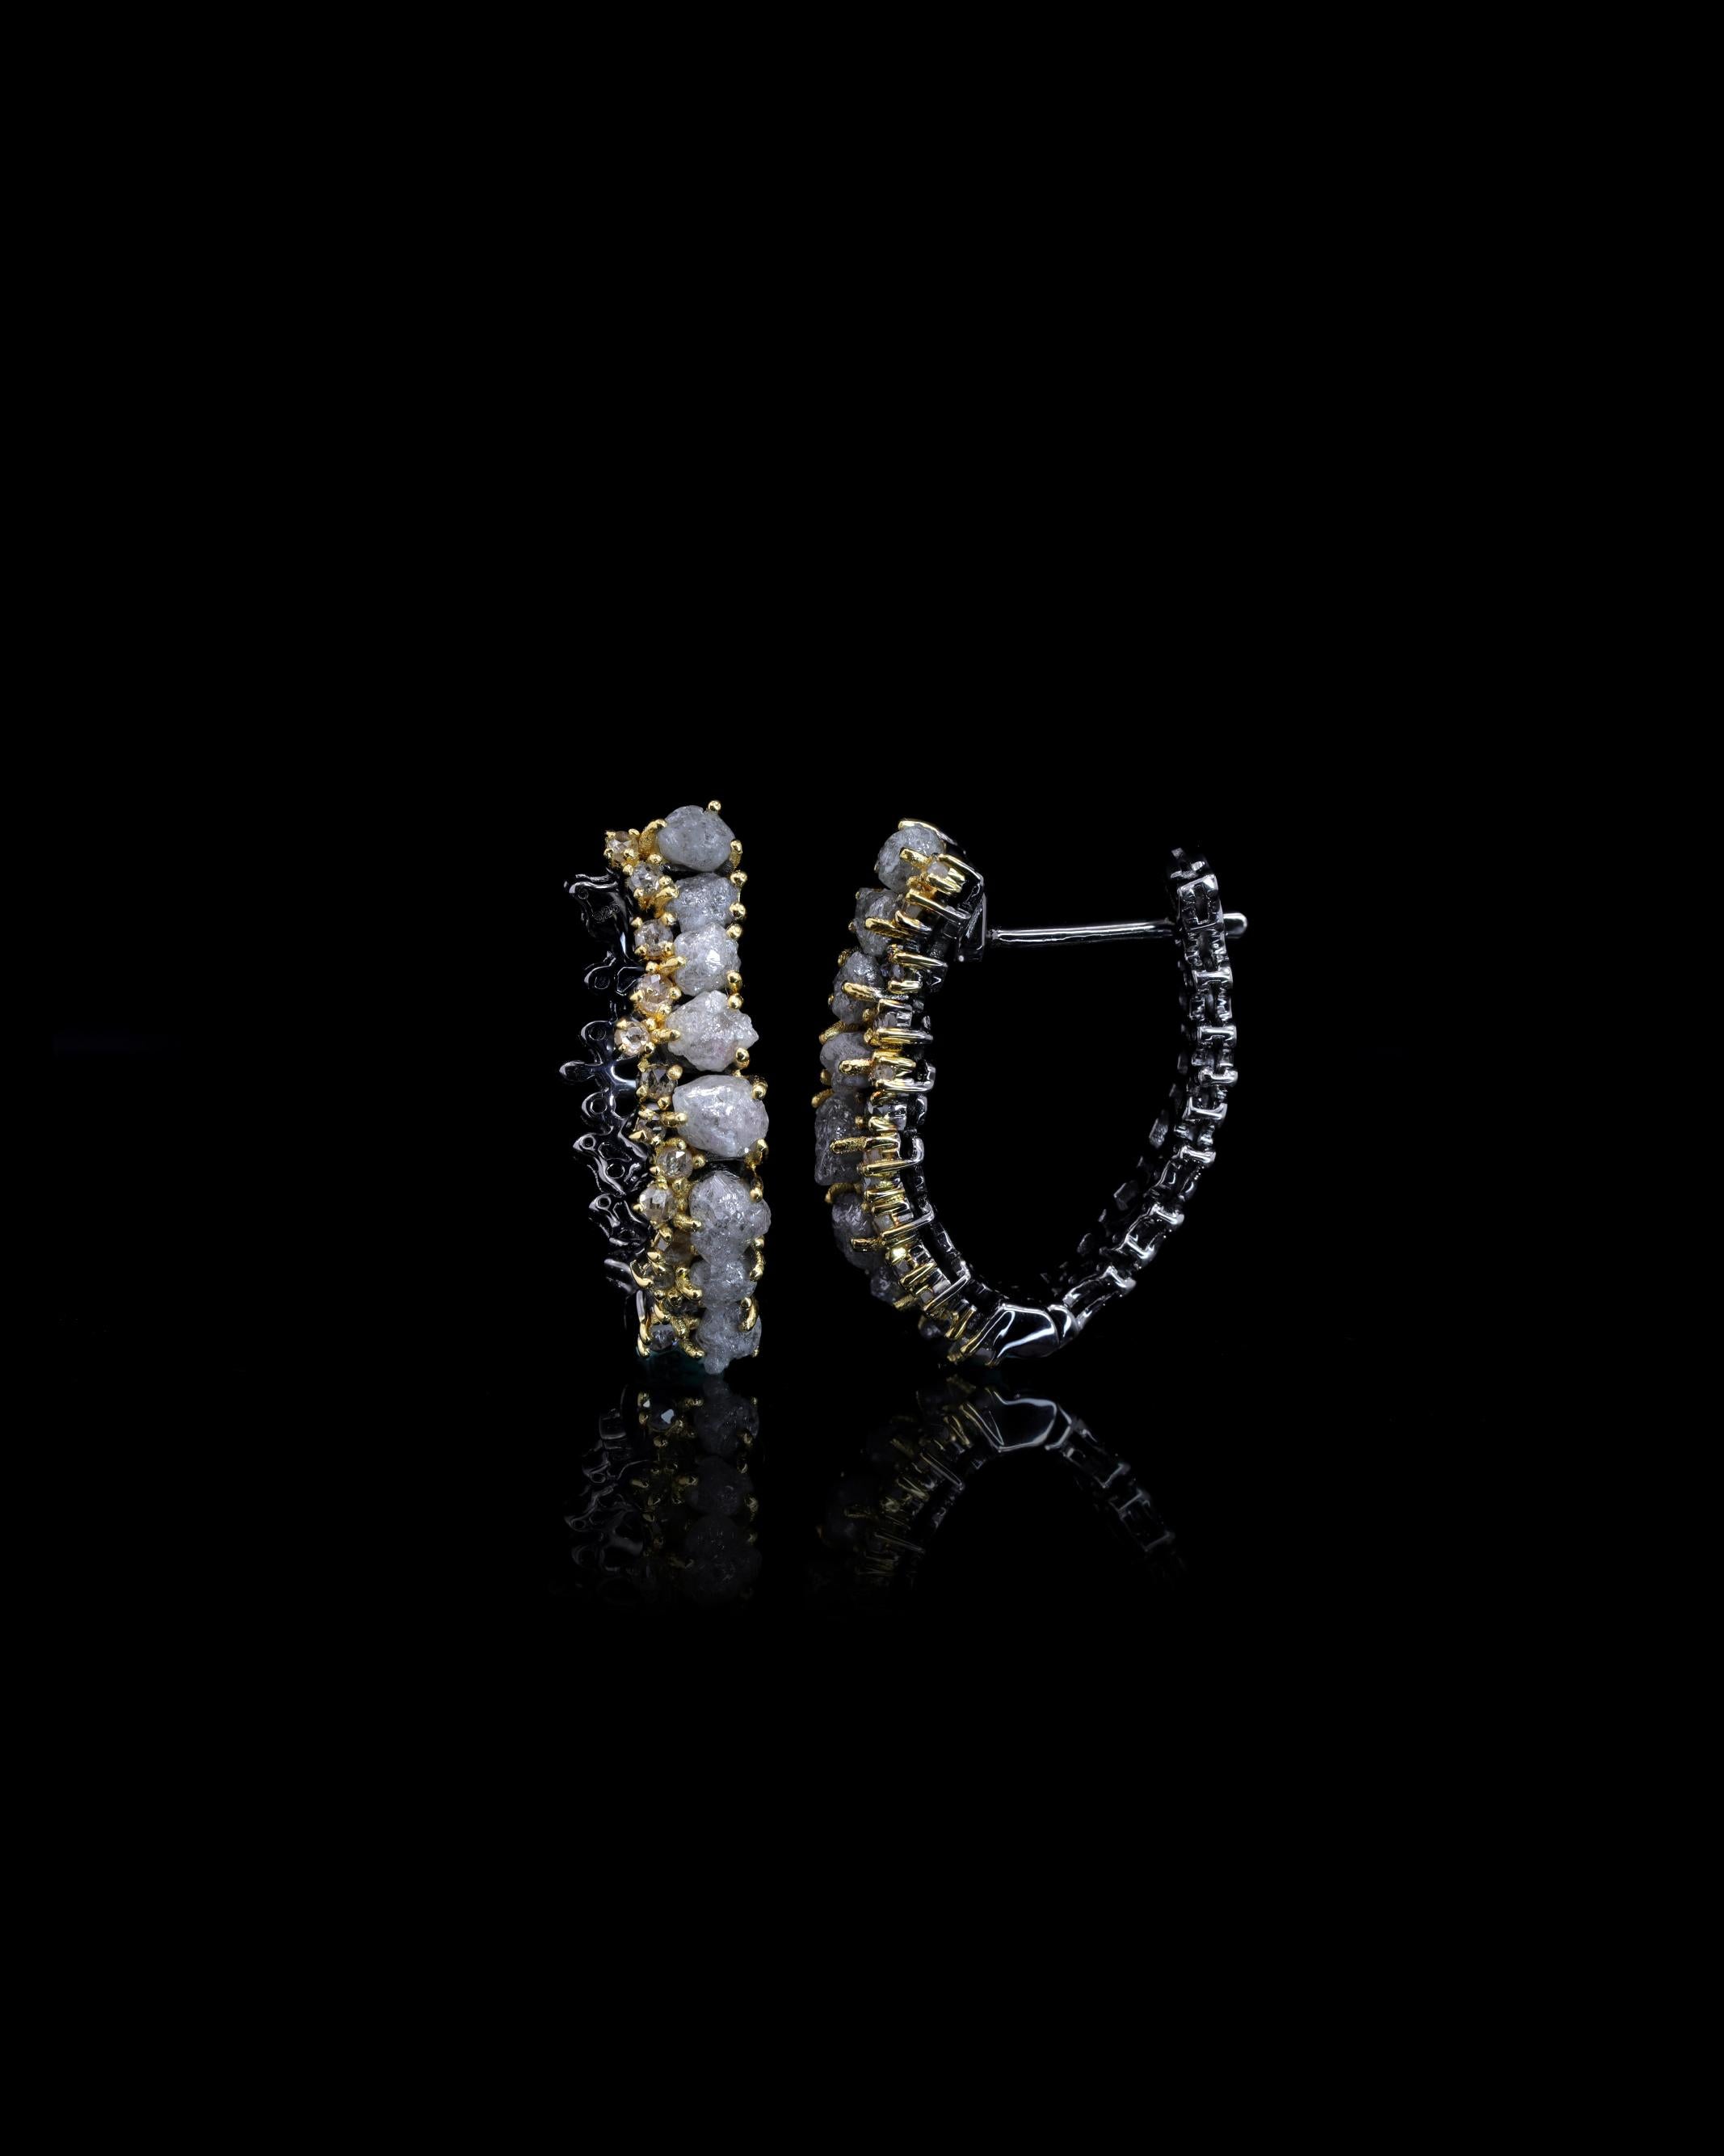 Embrace Serenity and Renewed Love with this auspicious earring.Immerse yourself in tranquility with our exquisite Tranquility Earring. Meticulously handcrafted with natural rough diamonds and brown rose cut diamonds, this earring from our Eternity